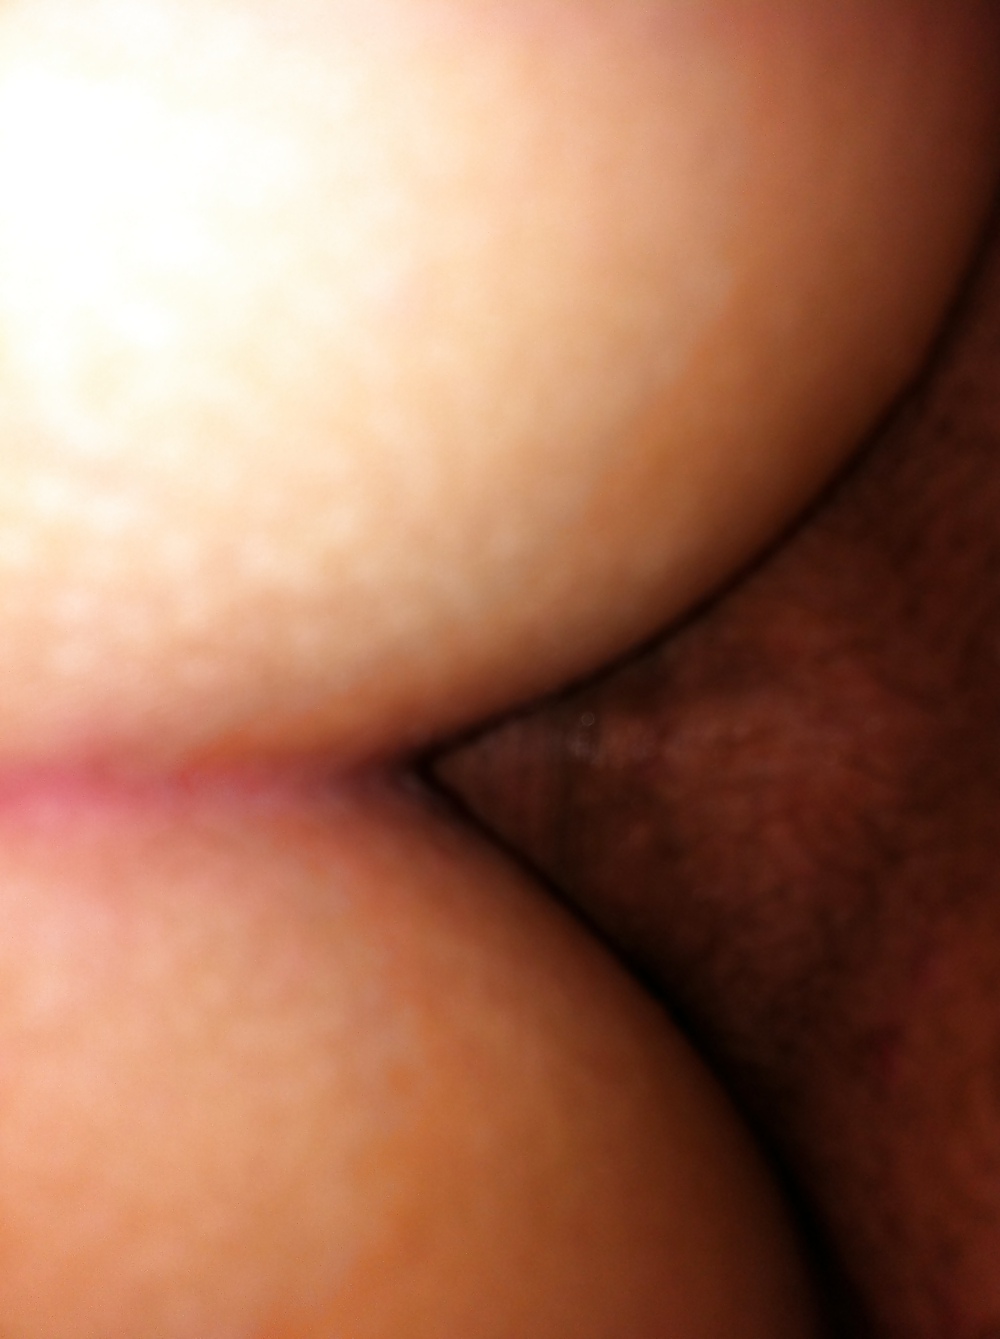 A few pics of me fucking my wifes ass porn pictures